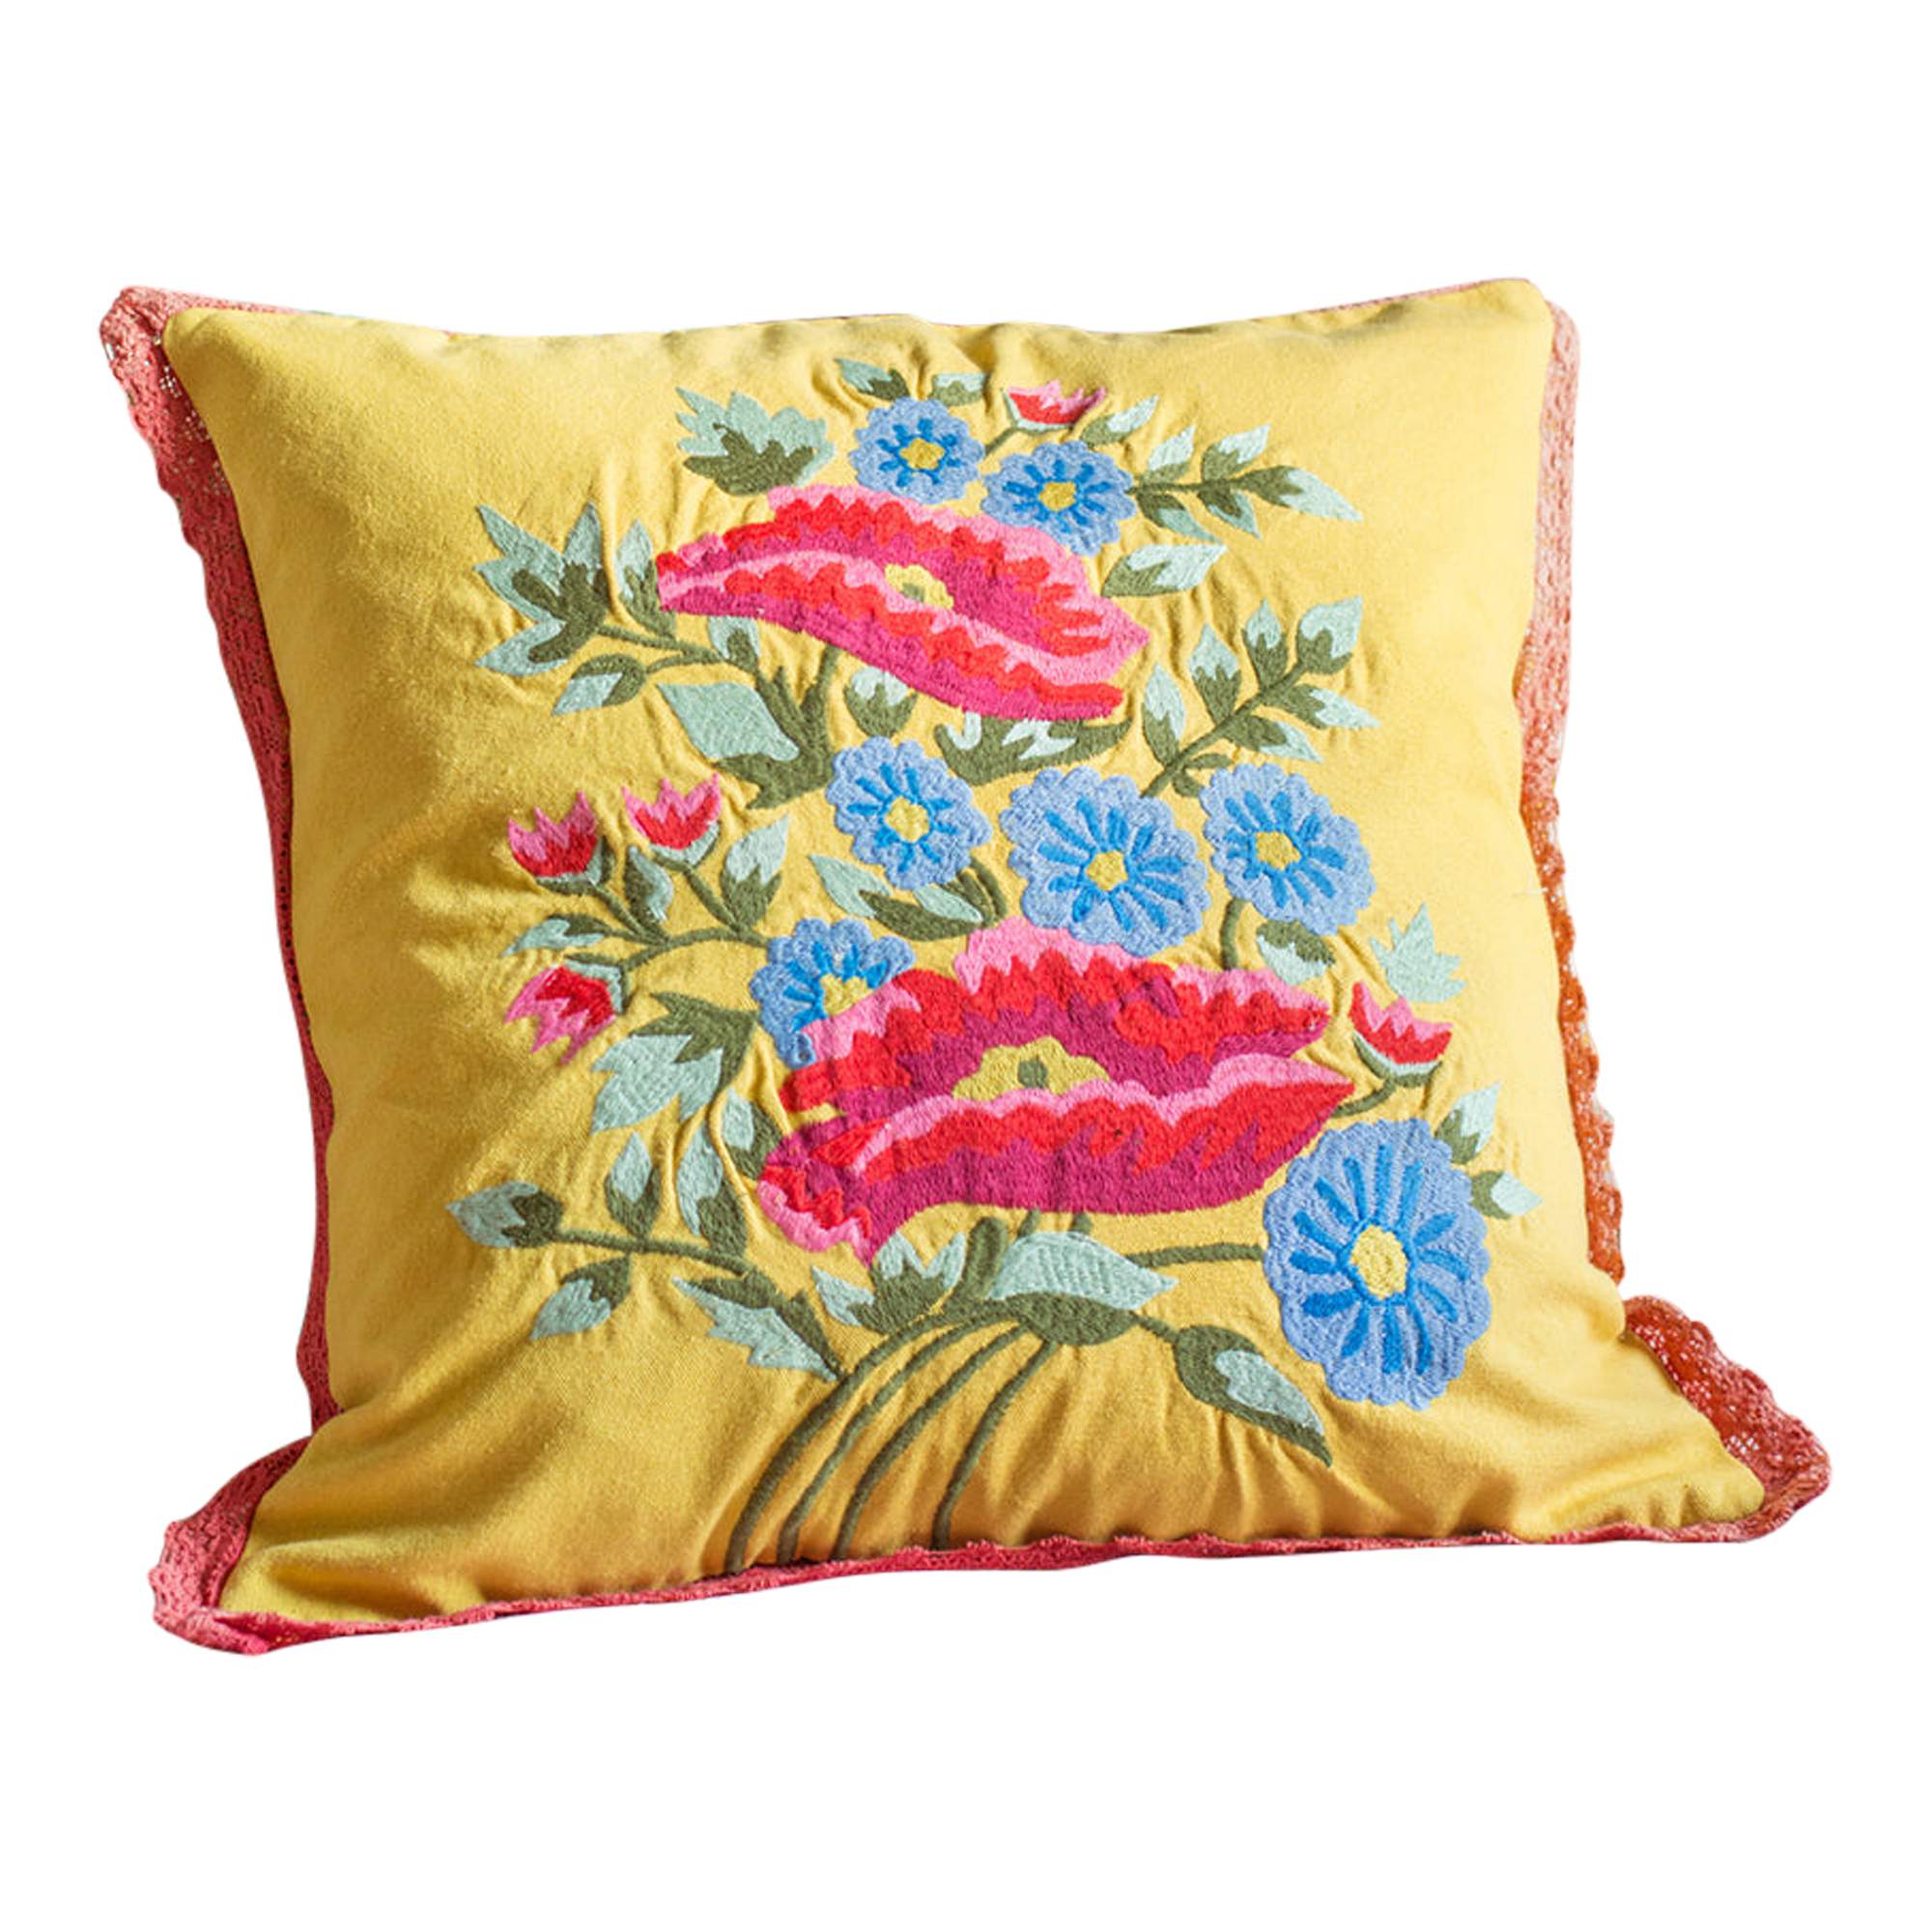 Poppies & Cornflowers Embroidered Cushion Cover